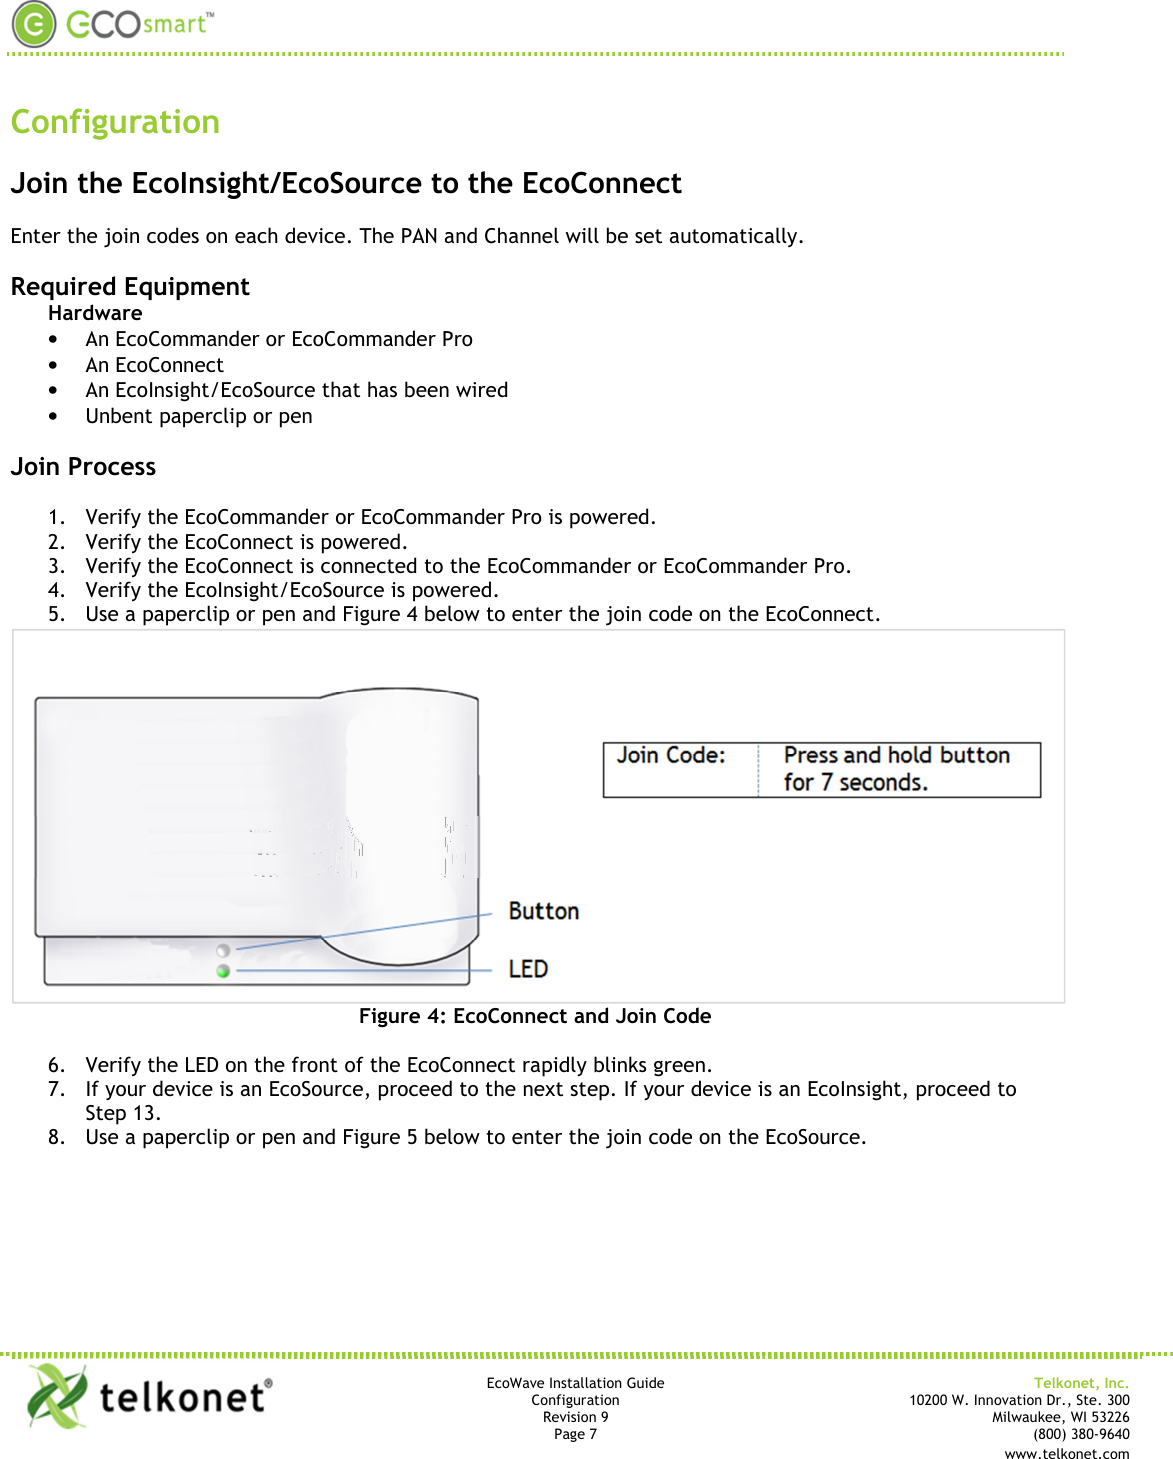       EcoWave Installation Guide Telkonet, Inc. Configuration 10200 W. Innovation Dr., Ste. 300 Revision 9 Milwaukee, WI 53226 Page 7   (800) 380-9640   www.telkonet.com         Configuration  Join the EcoInsight/EcoSource to the EcoConnect  Enter the join codes on each device. The PAN and Channel will be set automatically.  Required Equipment Hardware • An EcoCommander or EcoCommander Pro • An EcoConnect • An EcoInsight/EcoSource that has been wired • Unbent paperclip or pen  Join Process  1. Verify the EcoCommander or EcoCommander Pro is powered. 2. Verify the EcoConnect is powered. 3. Verify the EcoConnect is connected to the EcoCommander or EcoCommander Pro. 4. Verify the EcoInsight/EcoSource is powered. 5. Use a paperclip or pen and Figure 4 below to enter the join code on the EcoConnect.  Figure 4: EcoConnect and Join Code  6. Verify the LED on the front of the EcoConnect rapidly blinks green. 7. If your device is an EcoSource, proceed to the next step. If your device is an EcoInsight, proceed to Step 13. 8. Use a paperclip or pen and Figure 5 below to enter the join code on the EcoSource. 